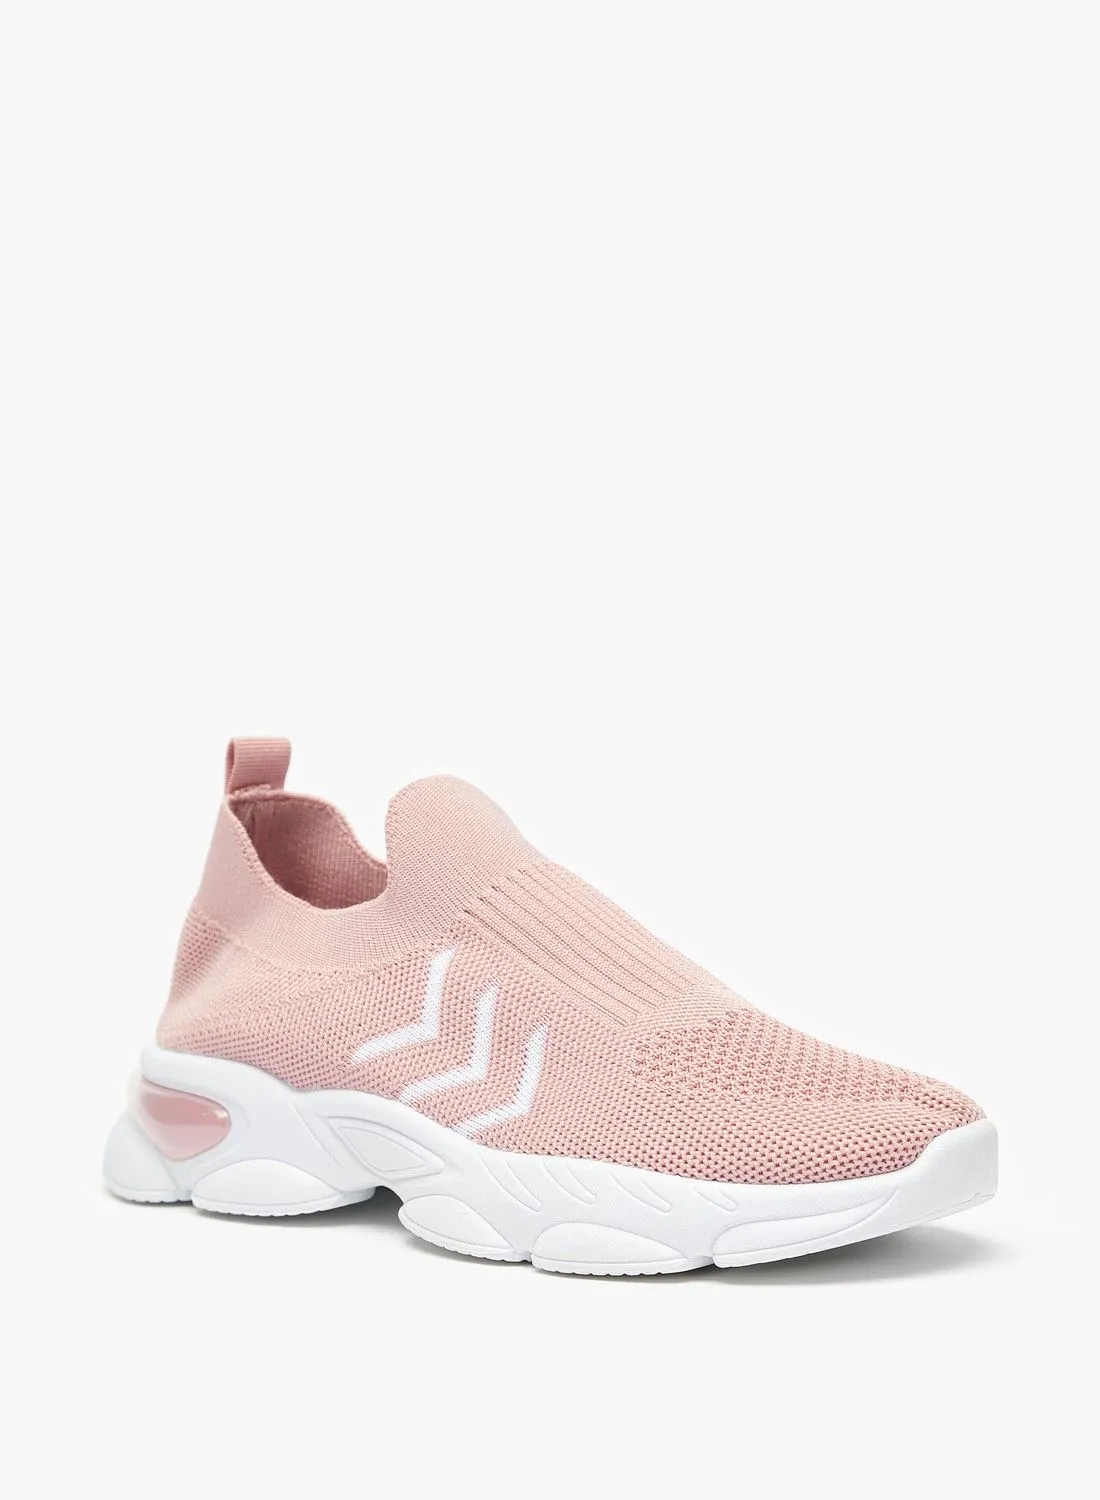 shoexpress Textured Slip On Sports Shoes with Pull Tab Detail